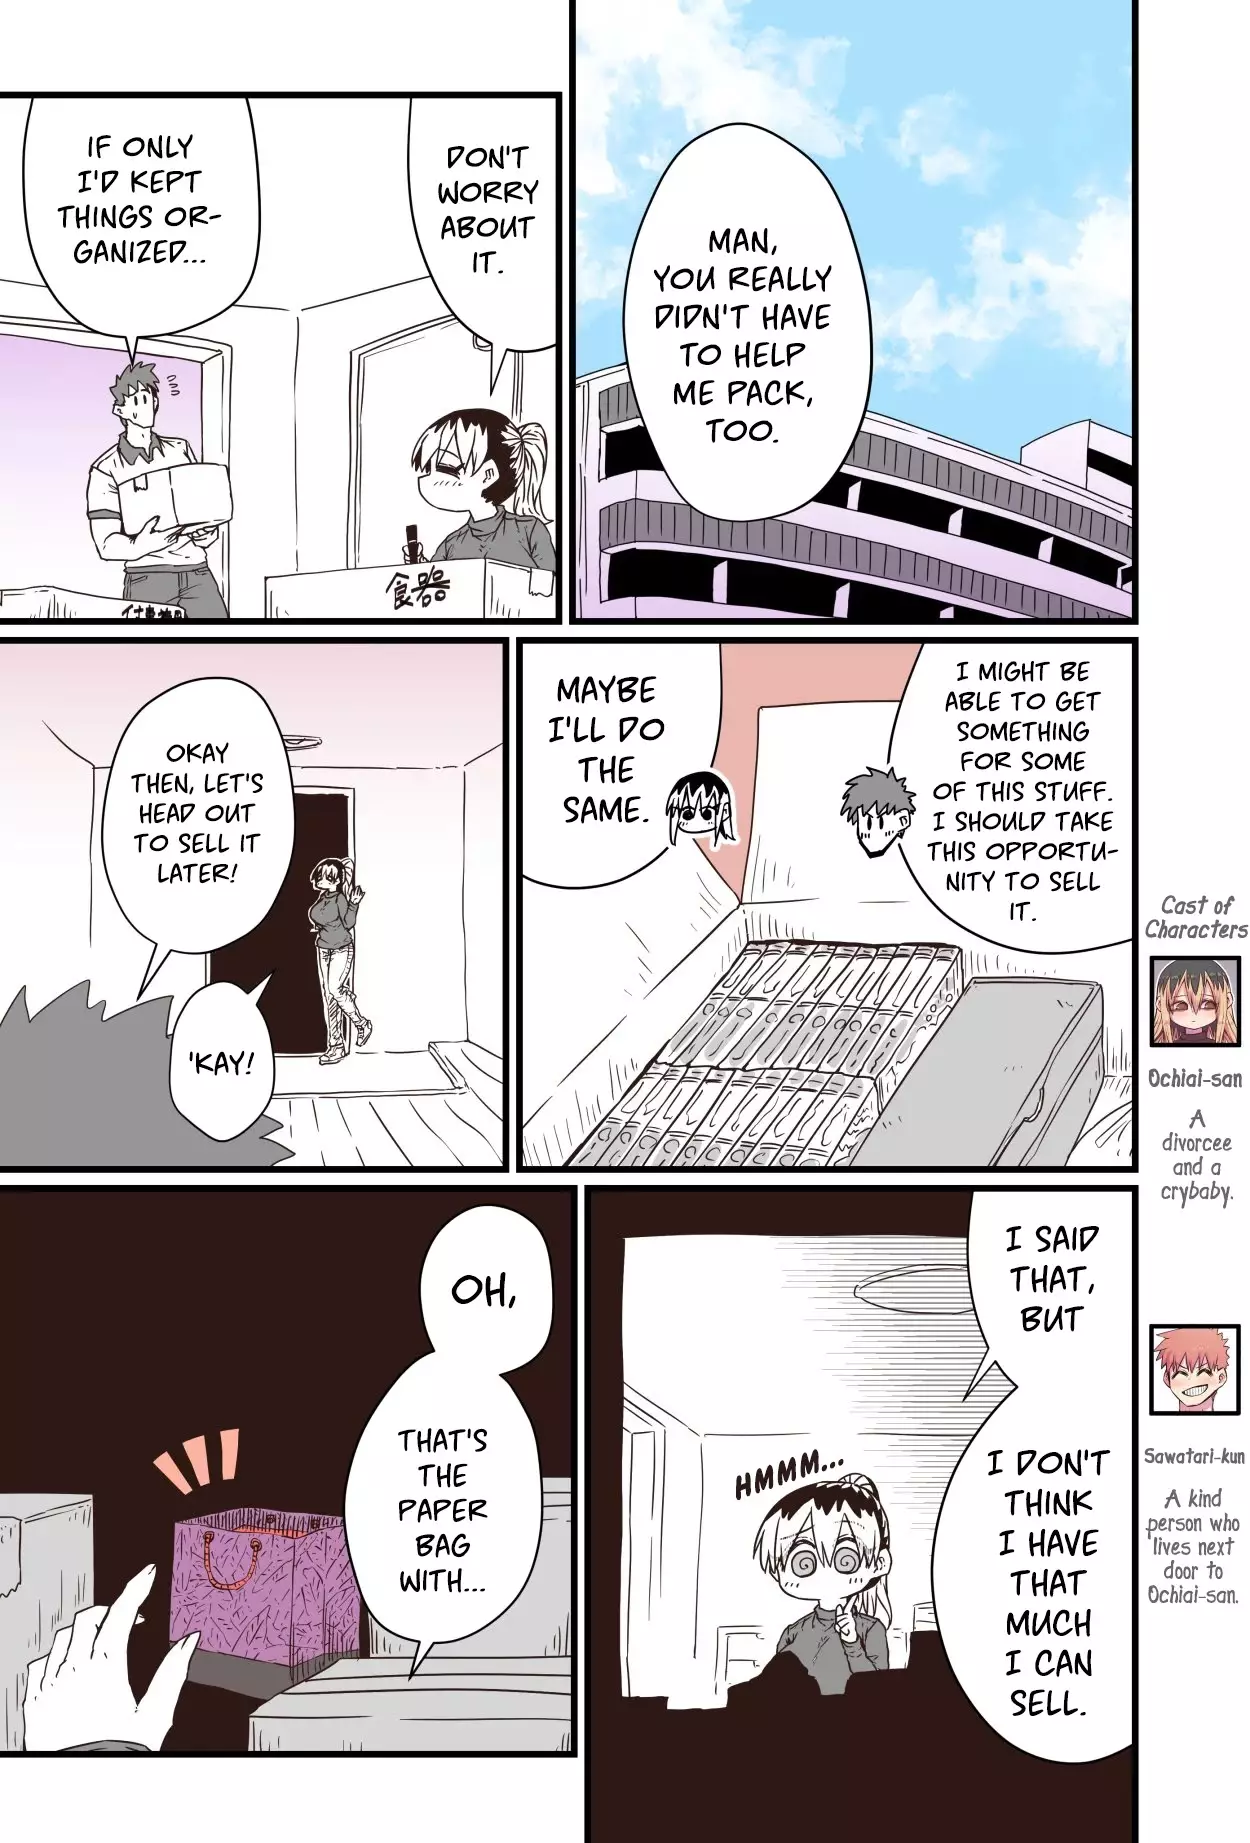 My Divorced Crybaby Neighbour - 24 page 1-314e0b3a